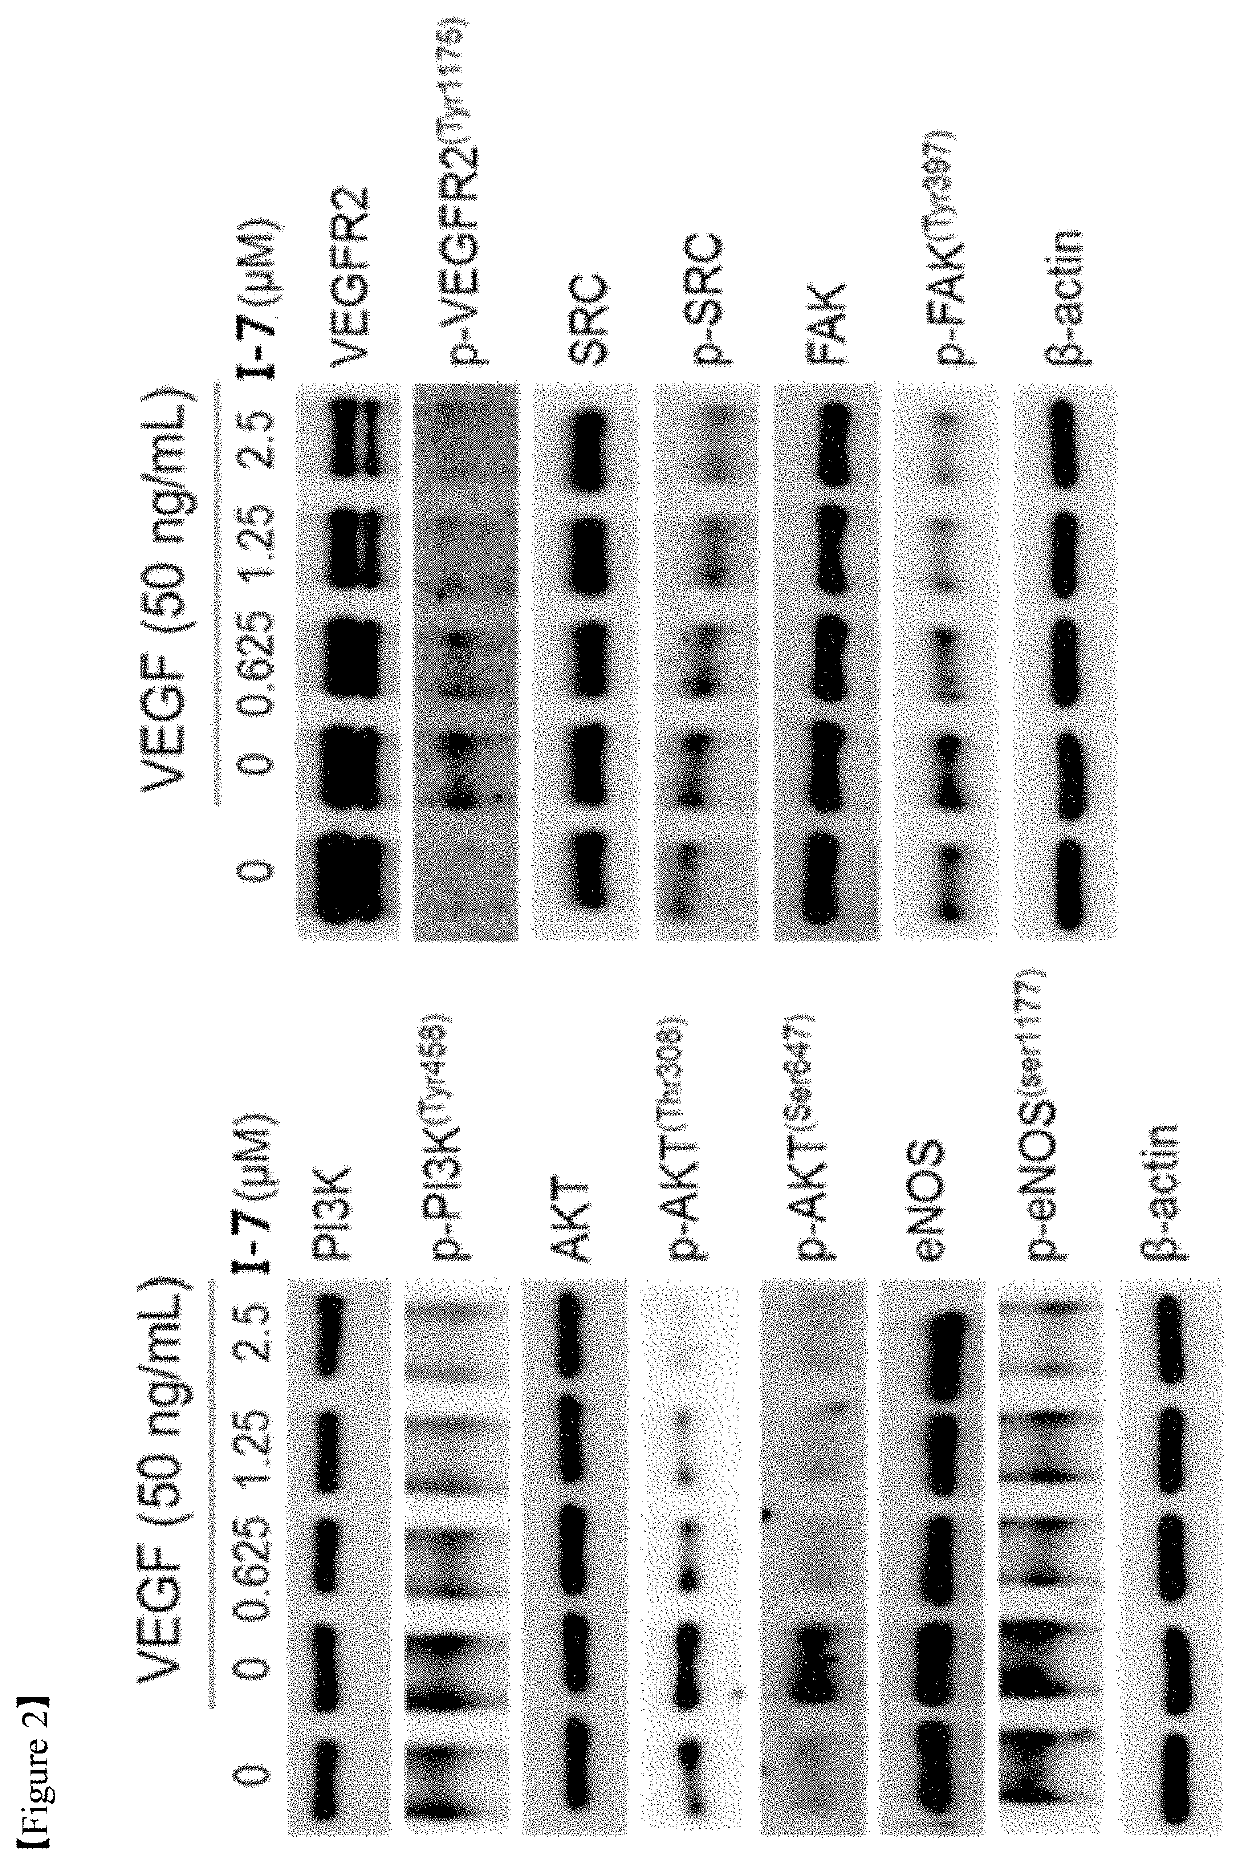 Alkaloid derivative having angiogenesis inhibitory effect, and pharmaceutical composition containing same